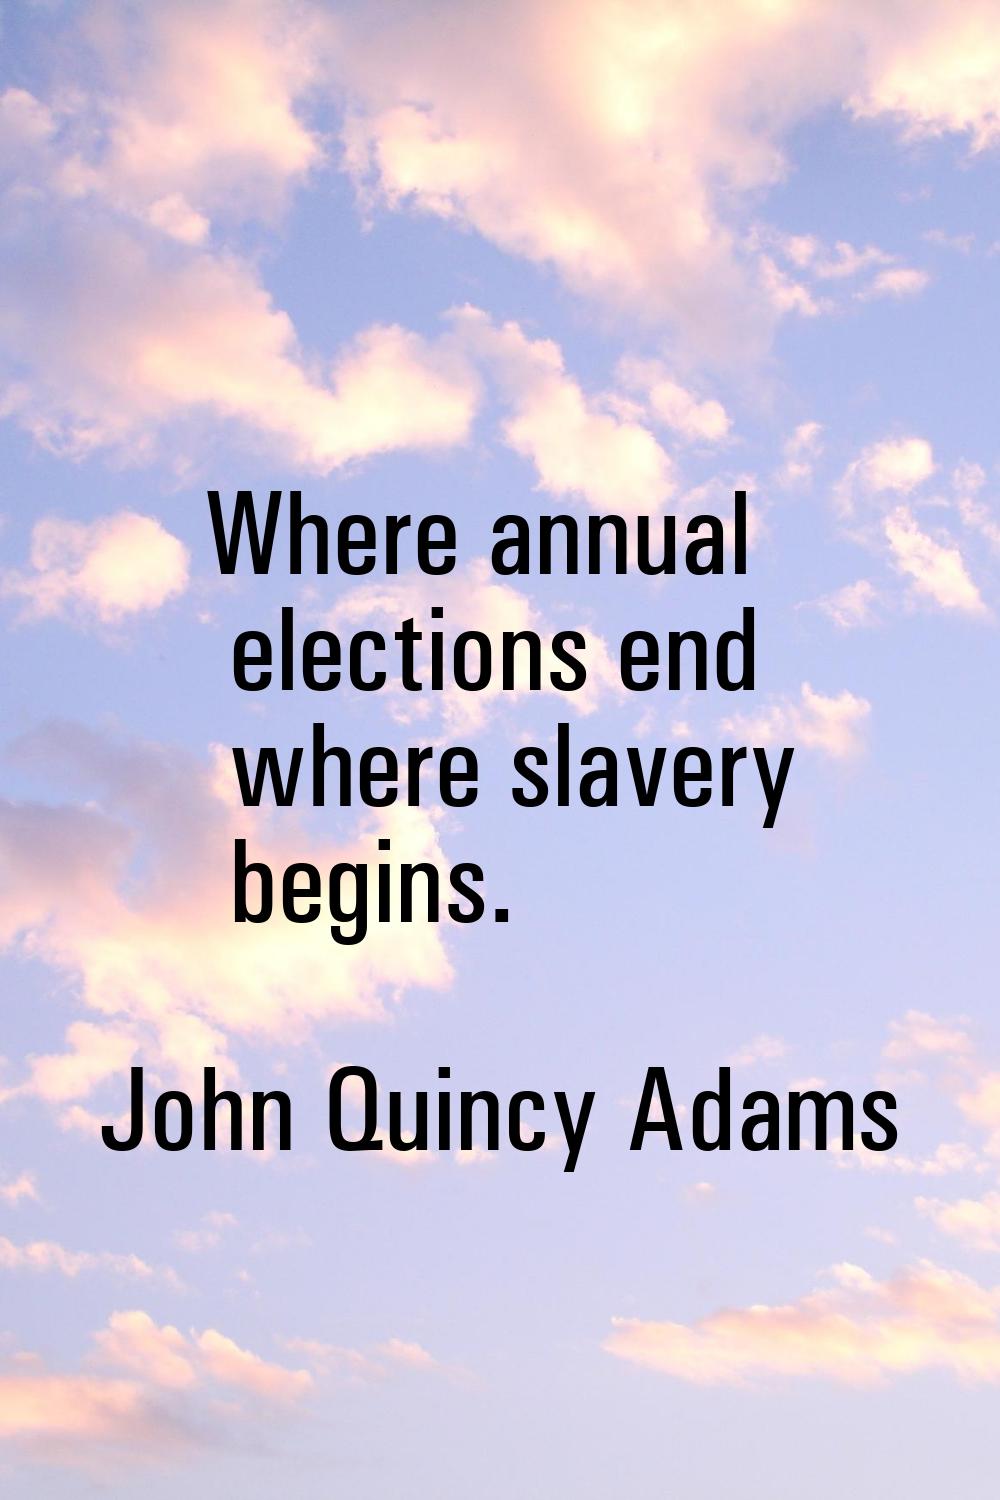 Where annual elections end where slavery begins.